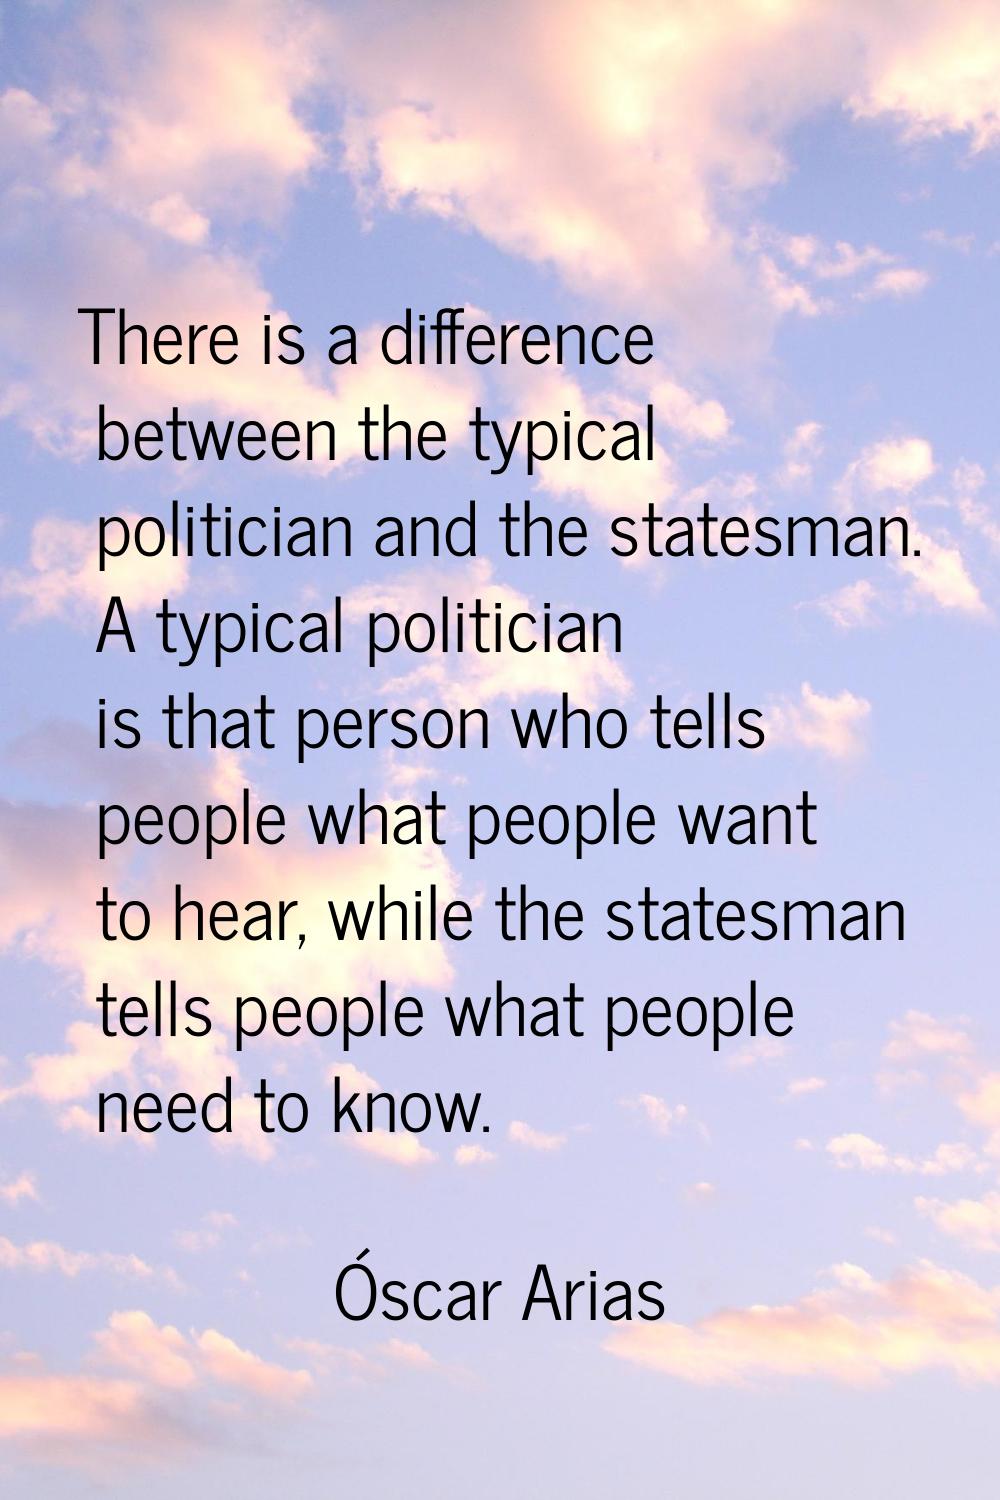 There is a difference between the typical politician and the statesman. A typical politician is tha